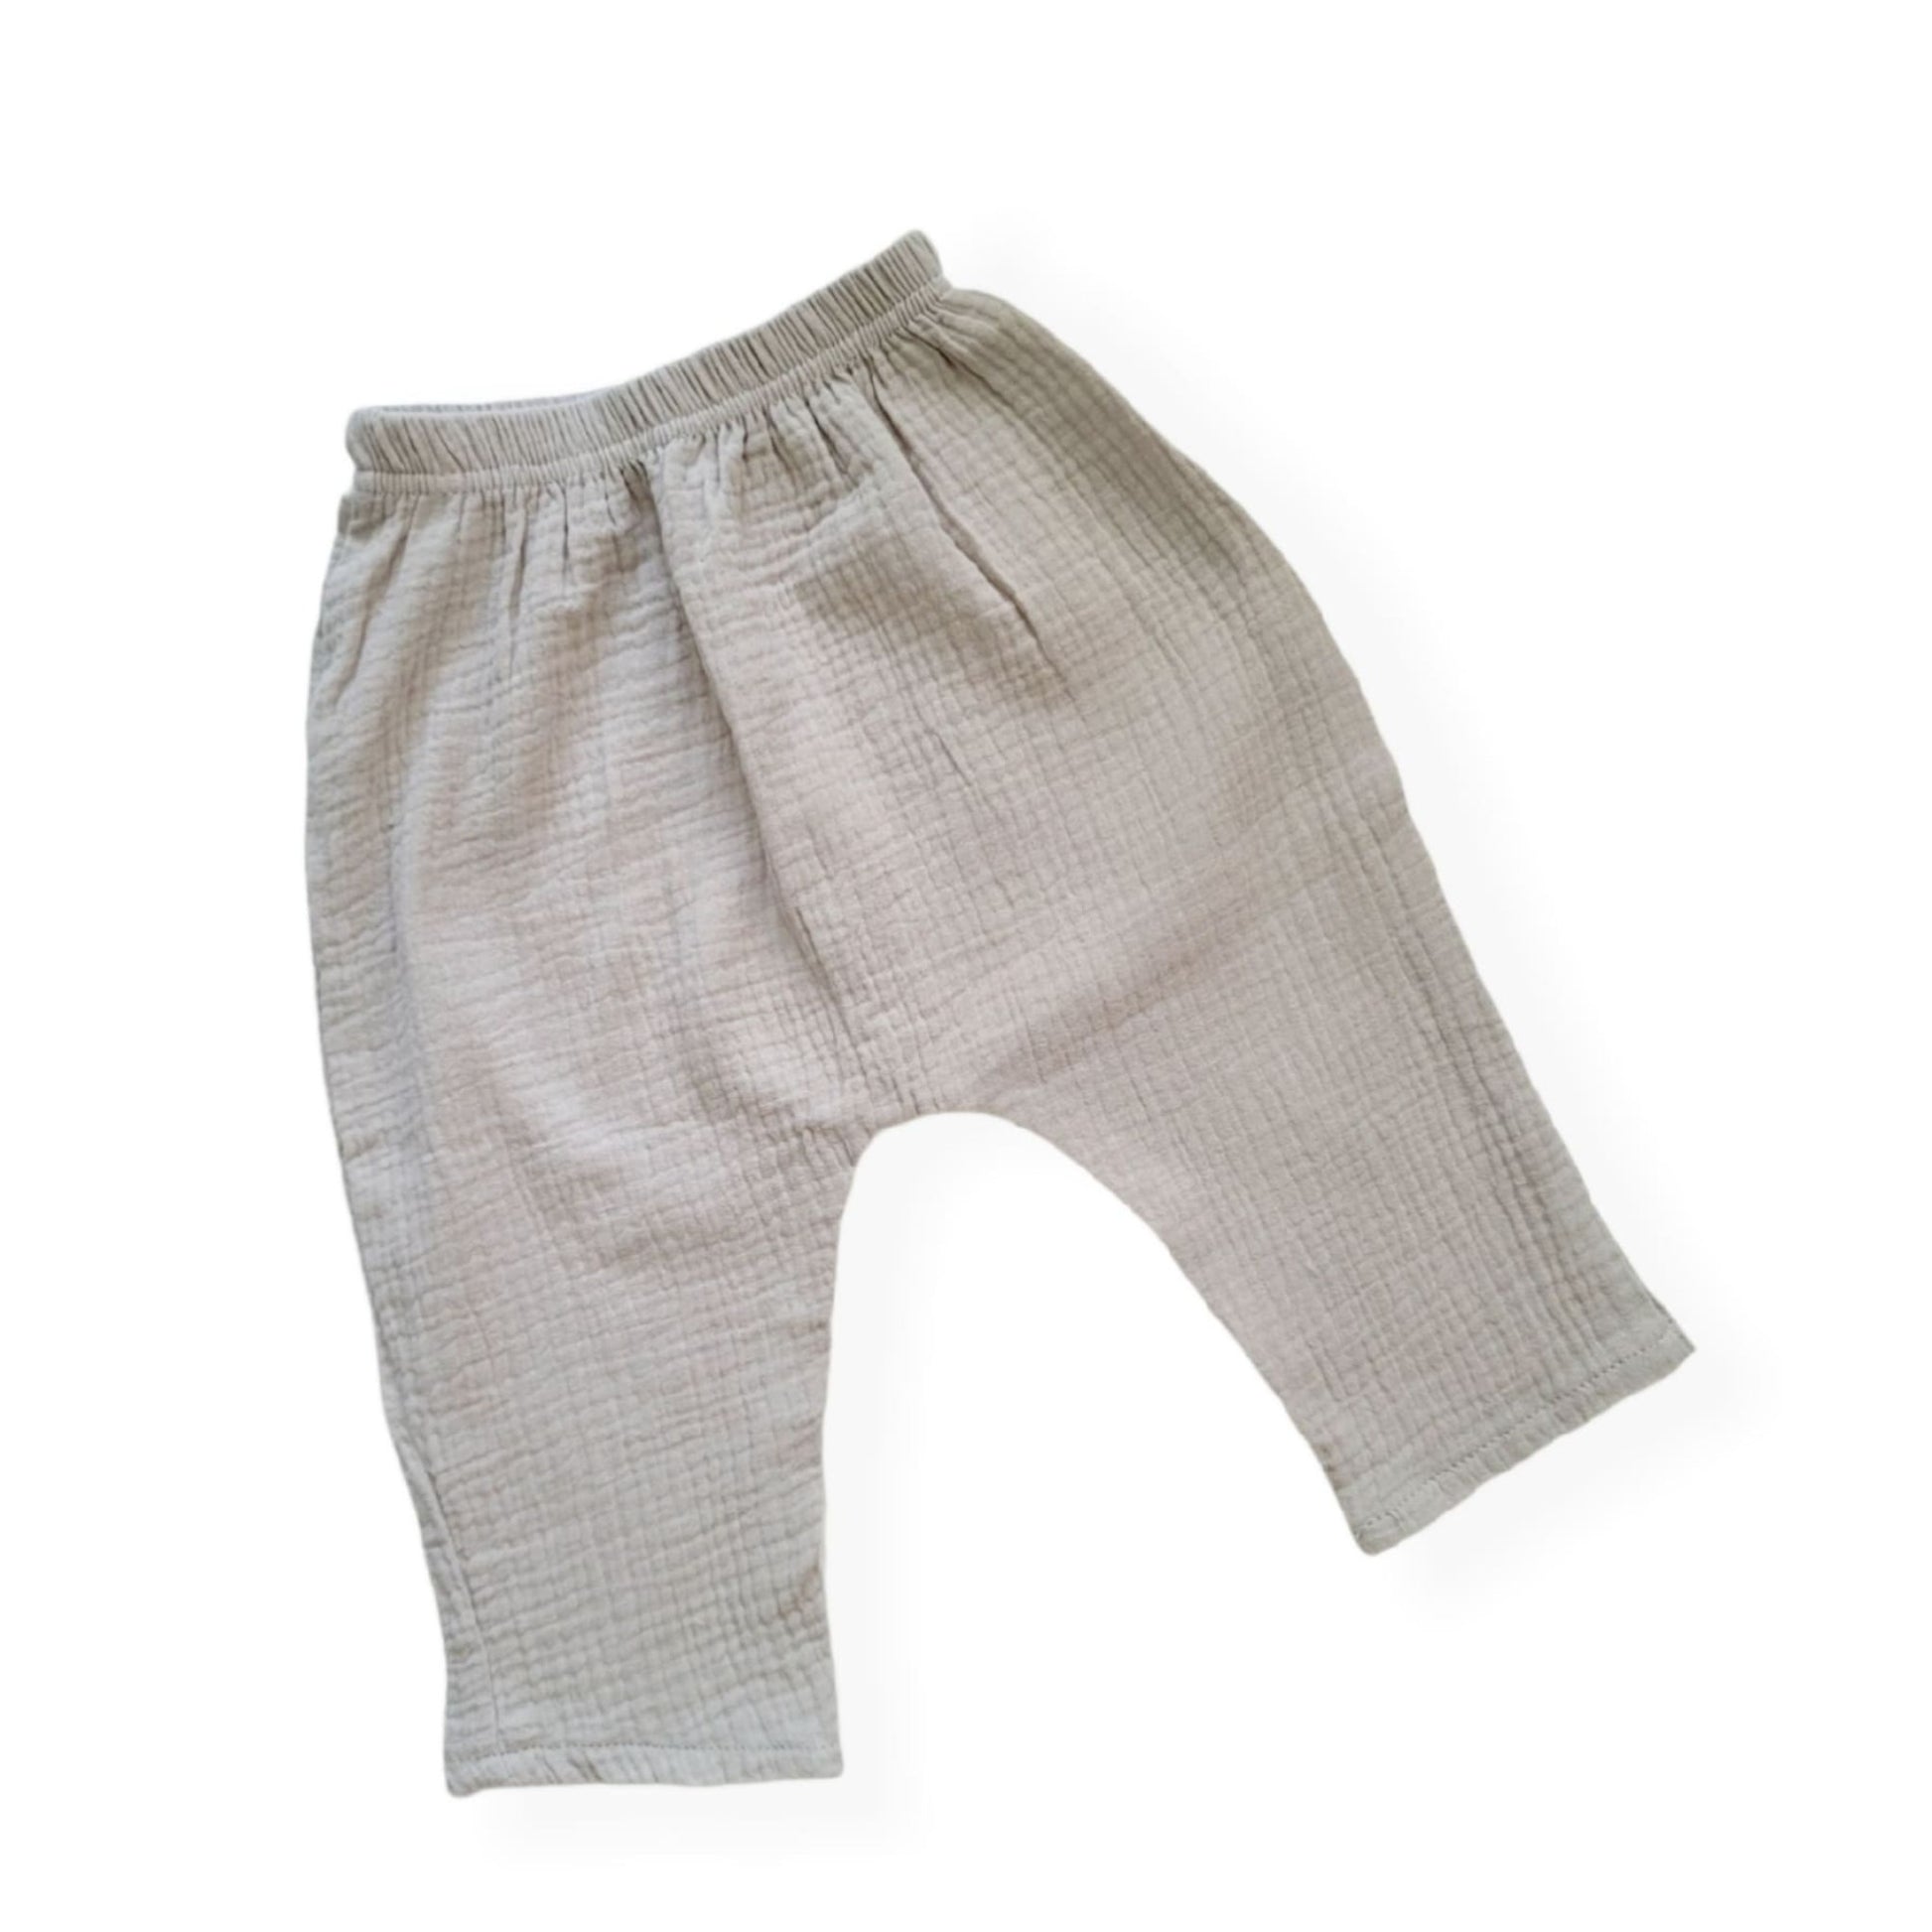 Pancho summer pants for babies and toddlers, cotton pants, fresh and comfortable- Hunny Bubba Kids